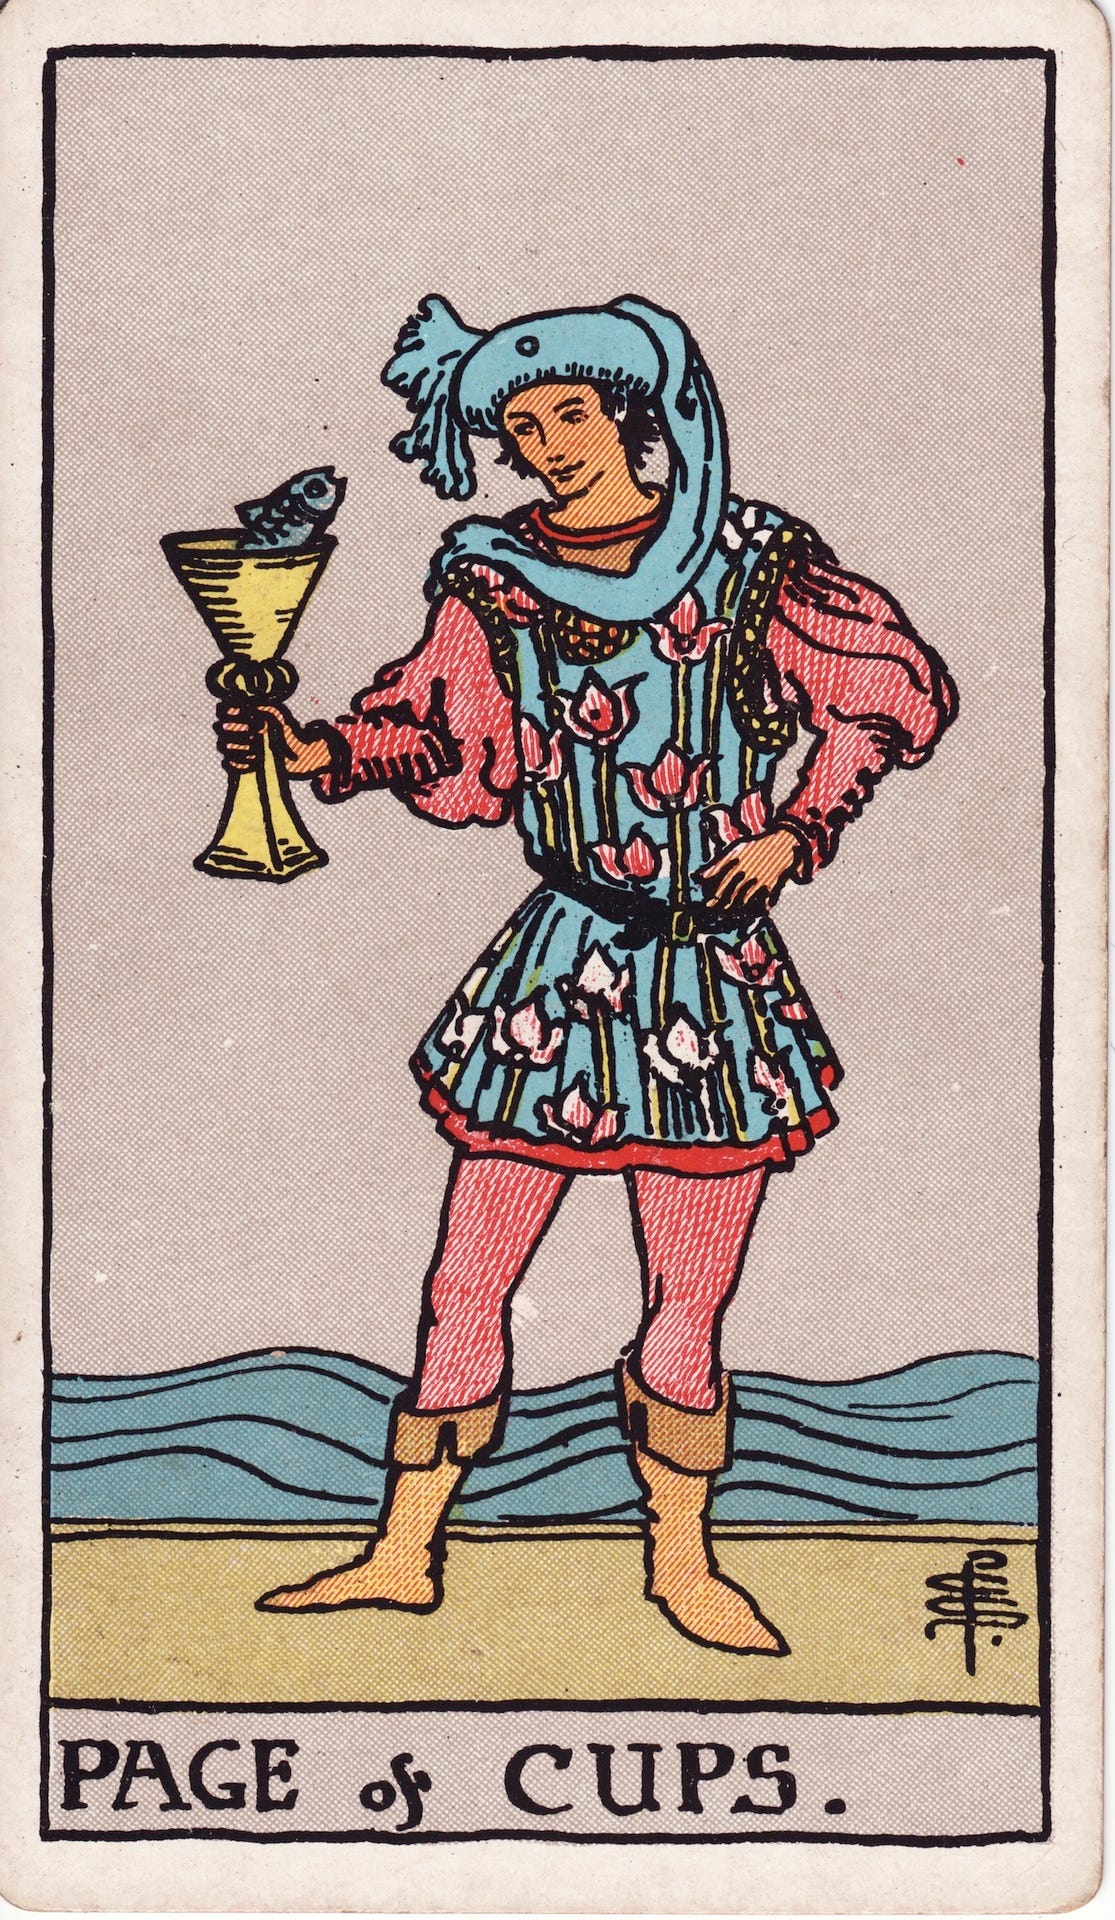 Page of Cups - Wikipedia